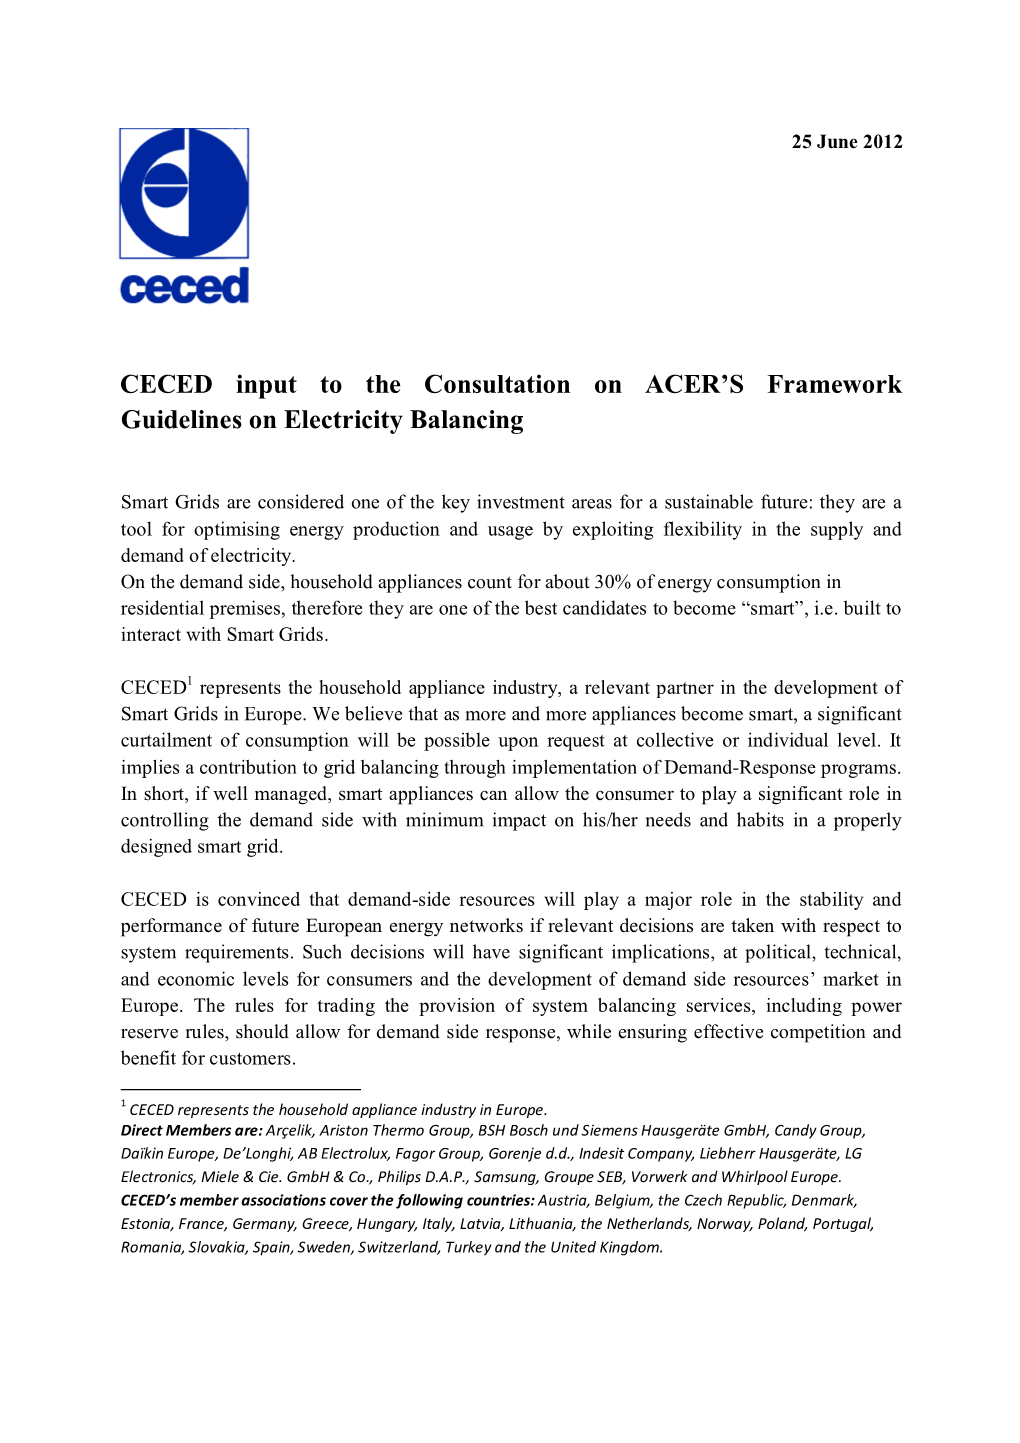 CECED Comments on ACER FG on Electricity Balancing